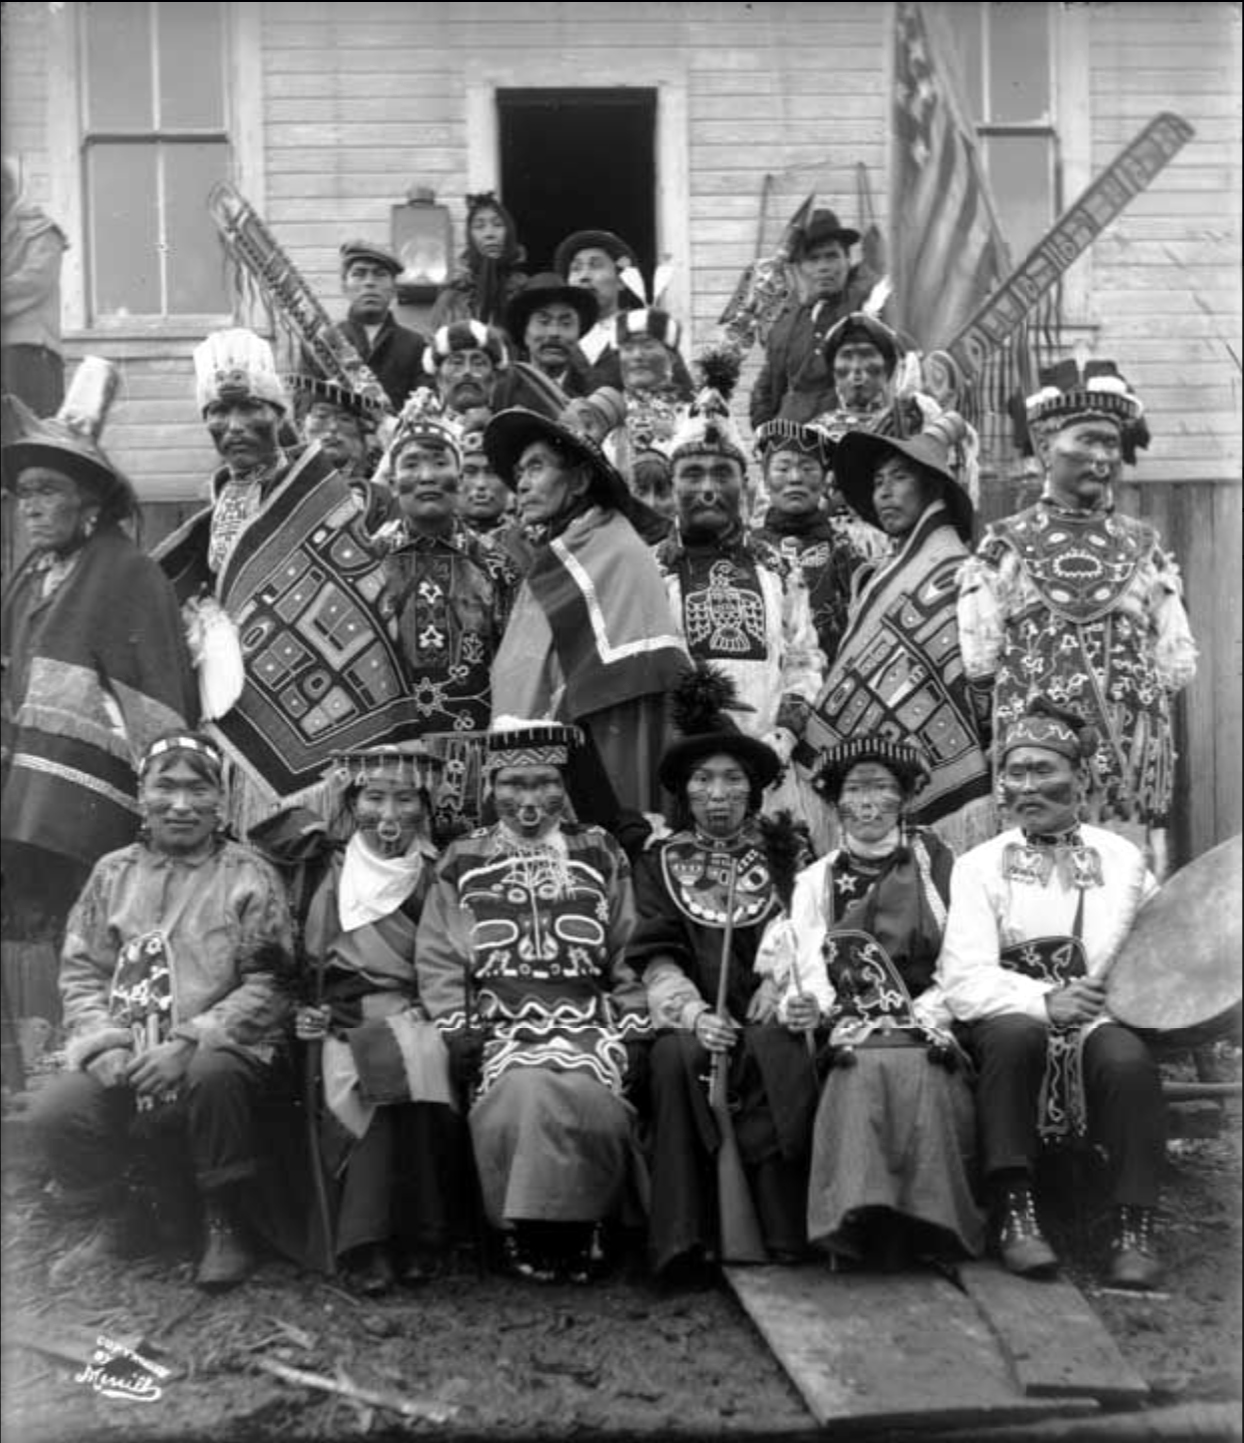 Tlingit guests at a potlatch in Sitka, Alaska, 1904, wearing naaxein robes and beaded regalia. Photo by Elbridge W. Merrill. Alaska State Library, P57-021